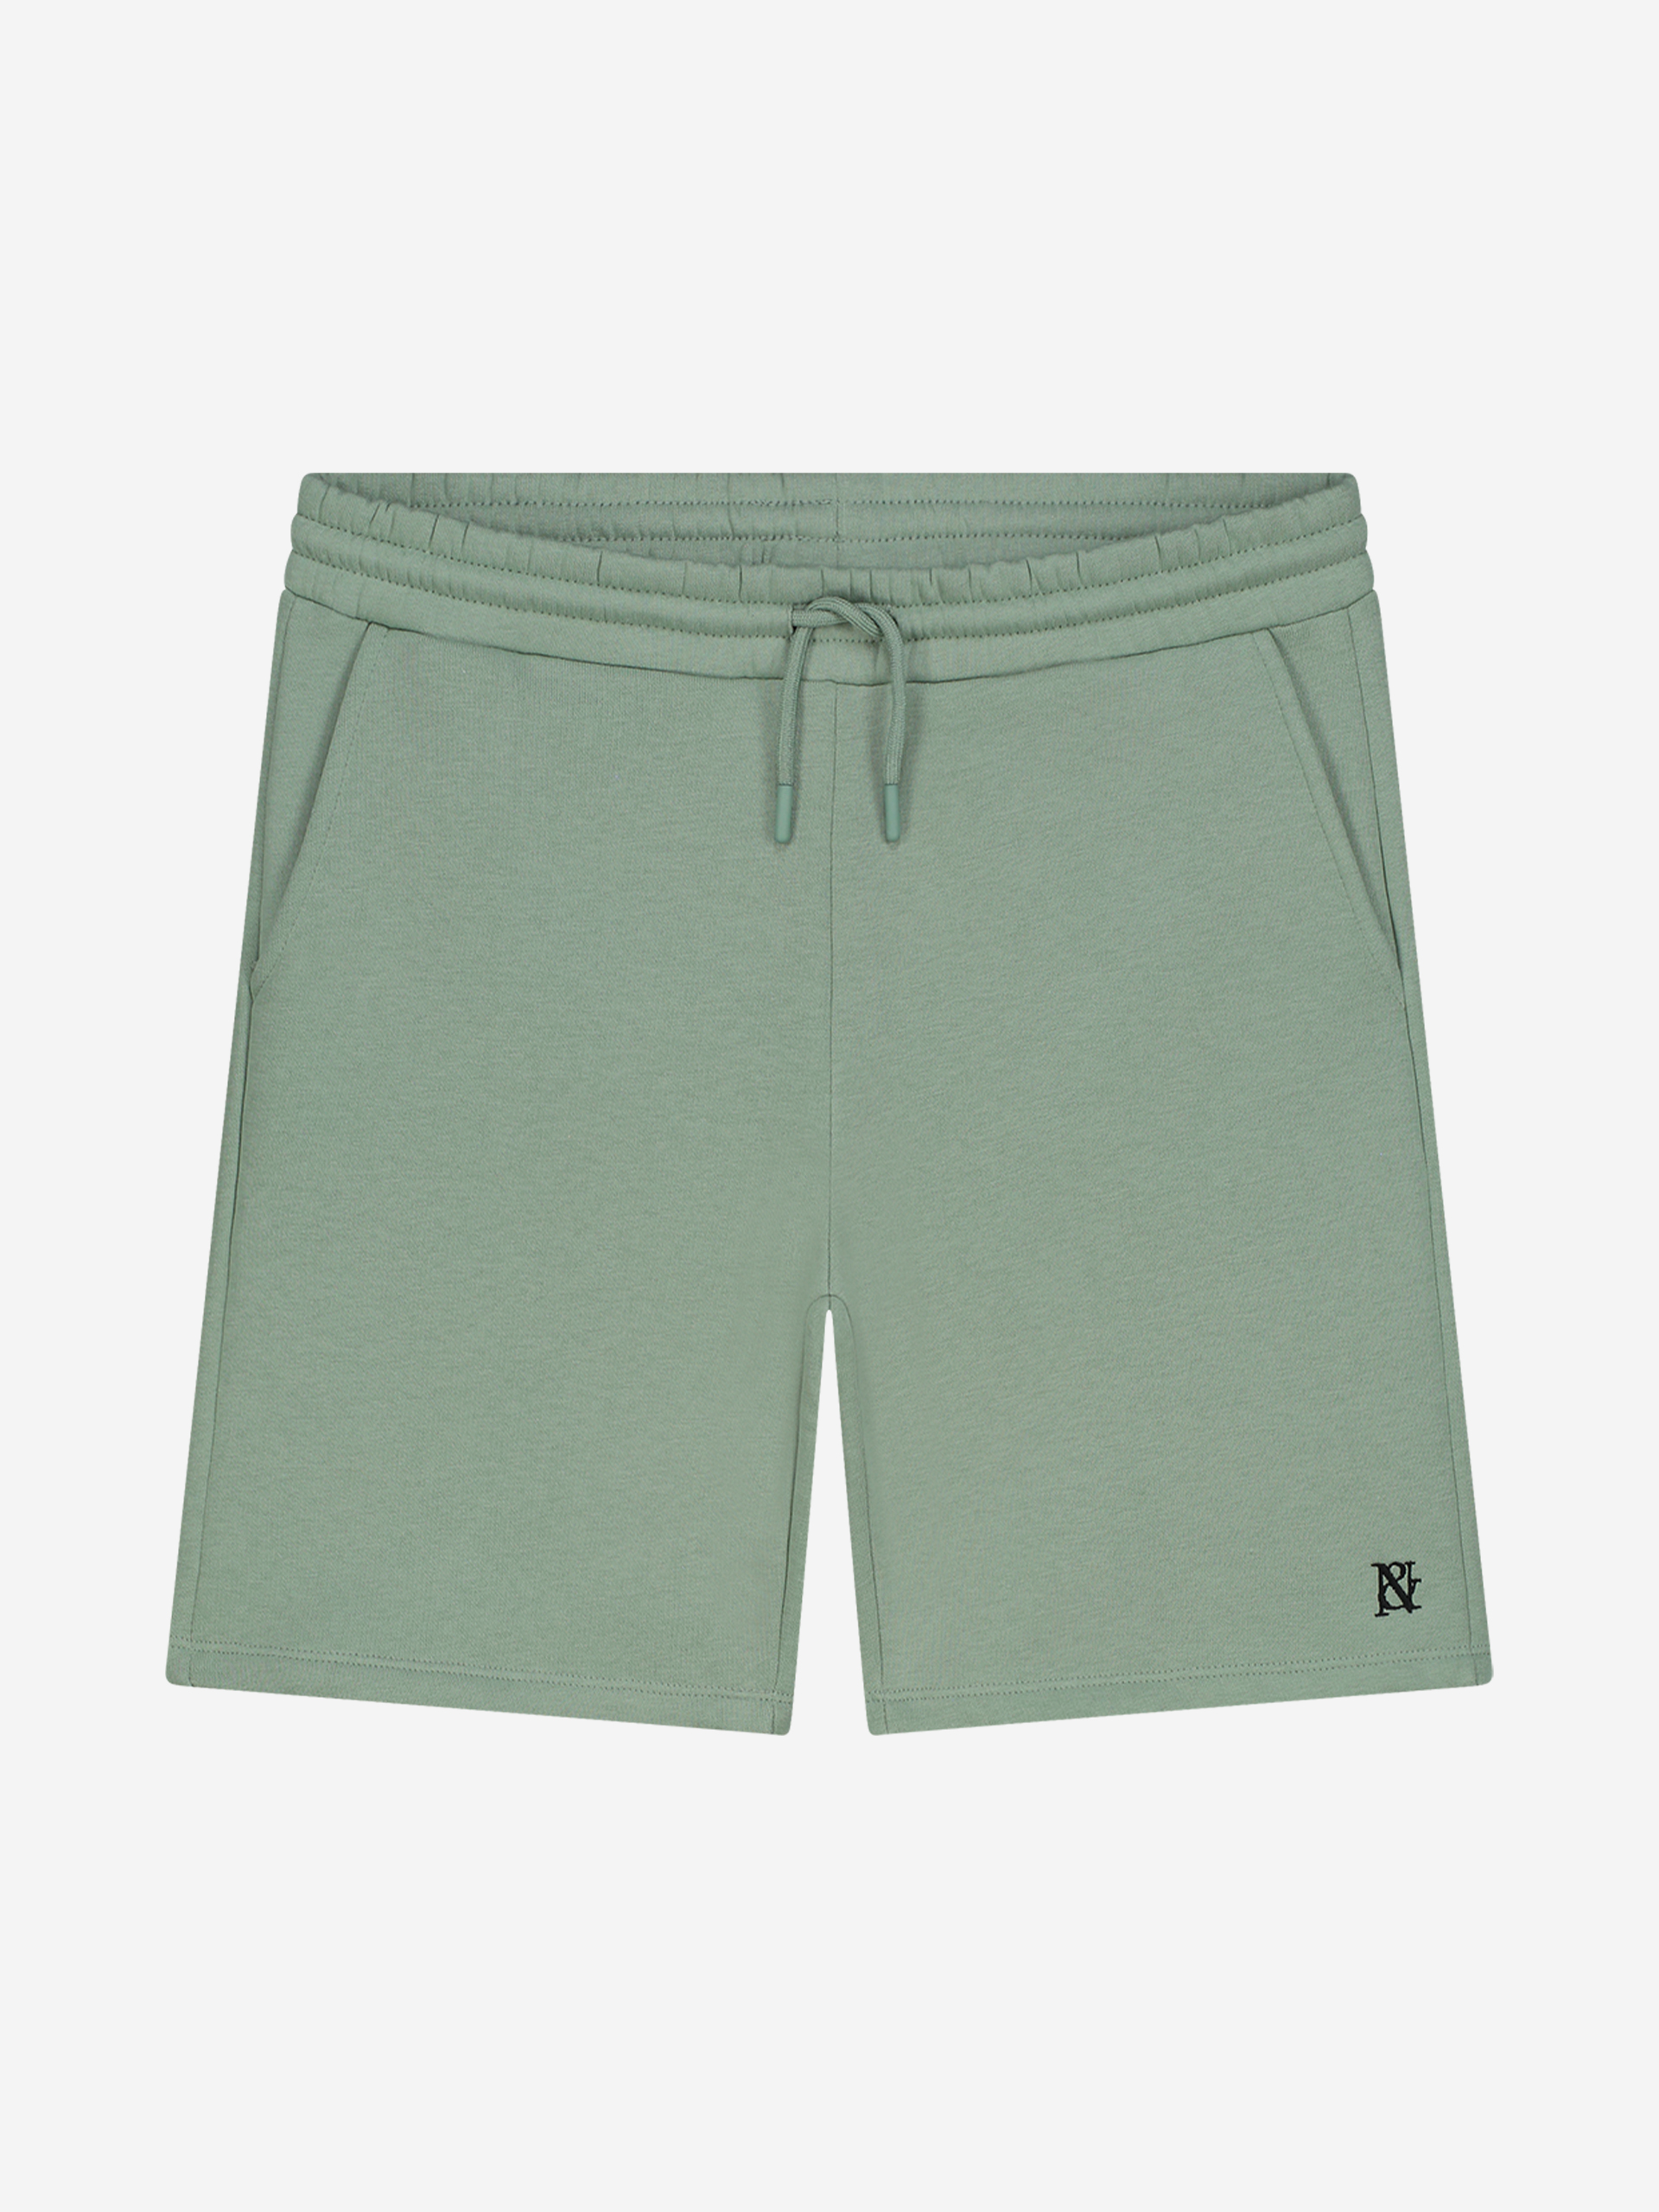 Sweatshort with mid rise and cord 